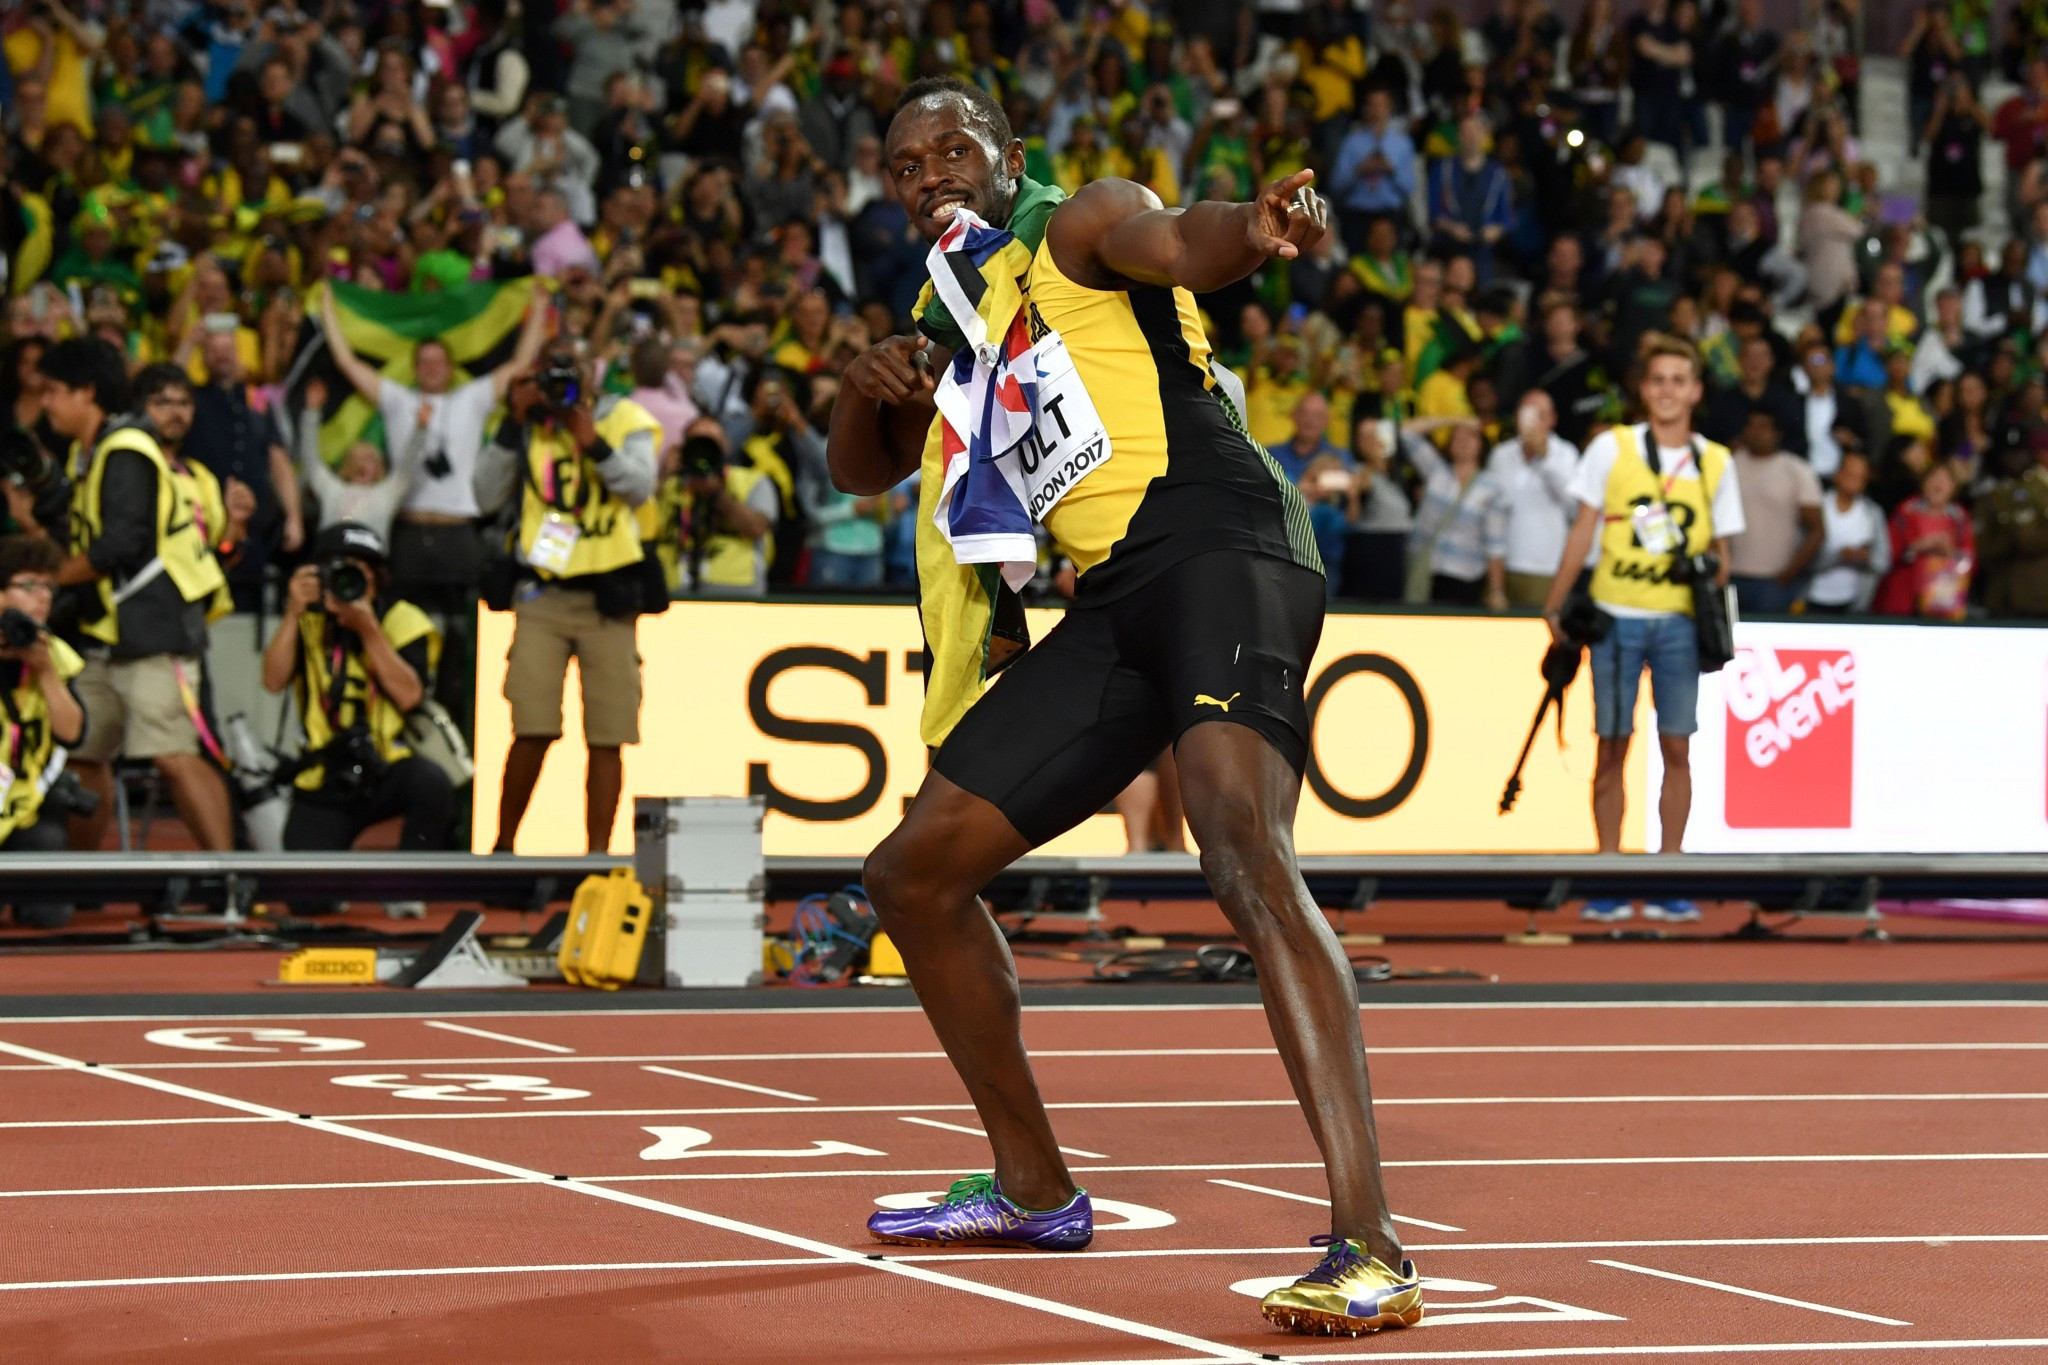 It was Usain Bolt who was still commanding all the attention after his third place finish ©Getty Images